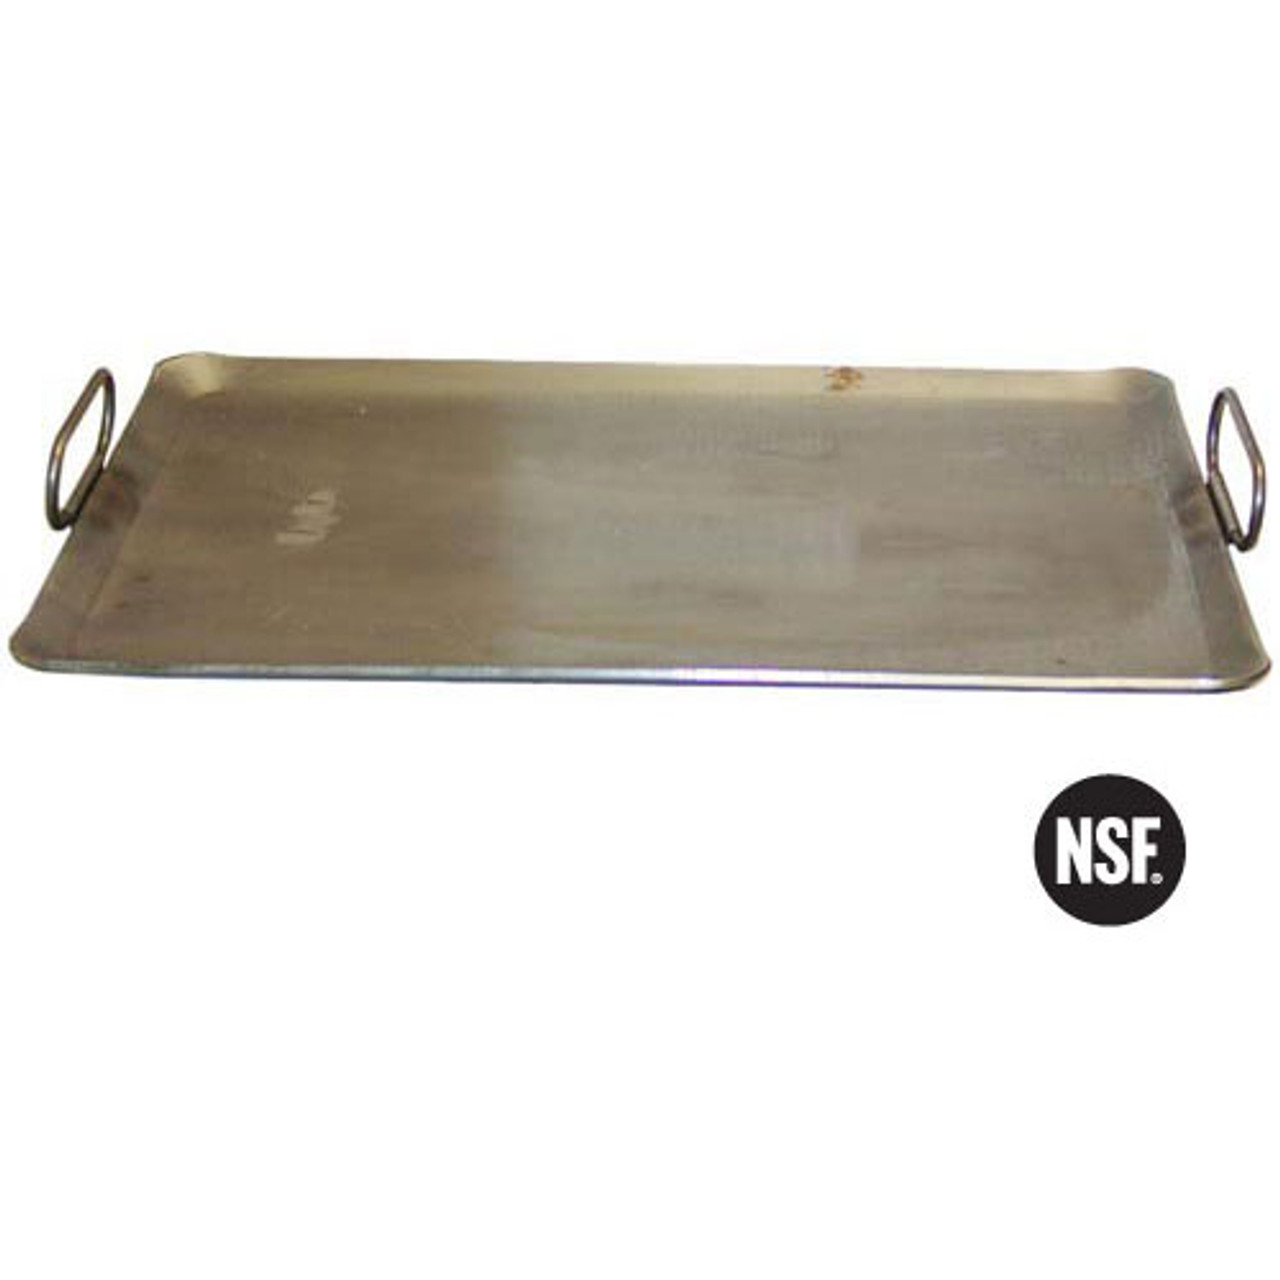 Portable Griddle Top 2 Burner - Replacement Part For Rocky Mountain Cookware RM1423-8